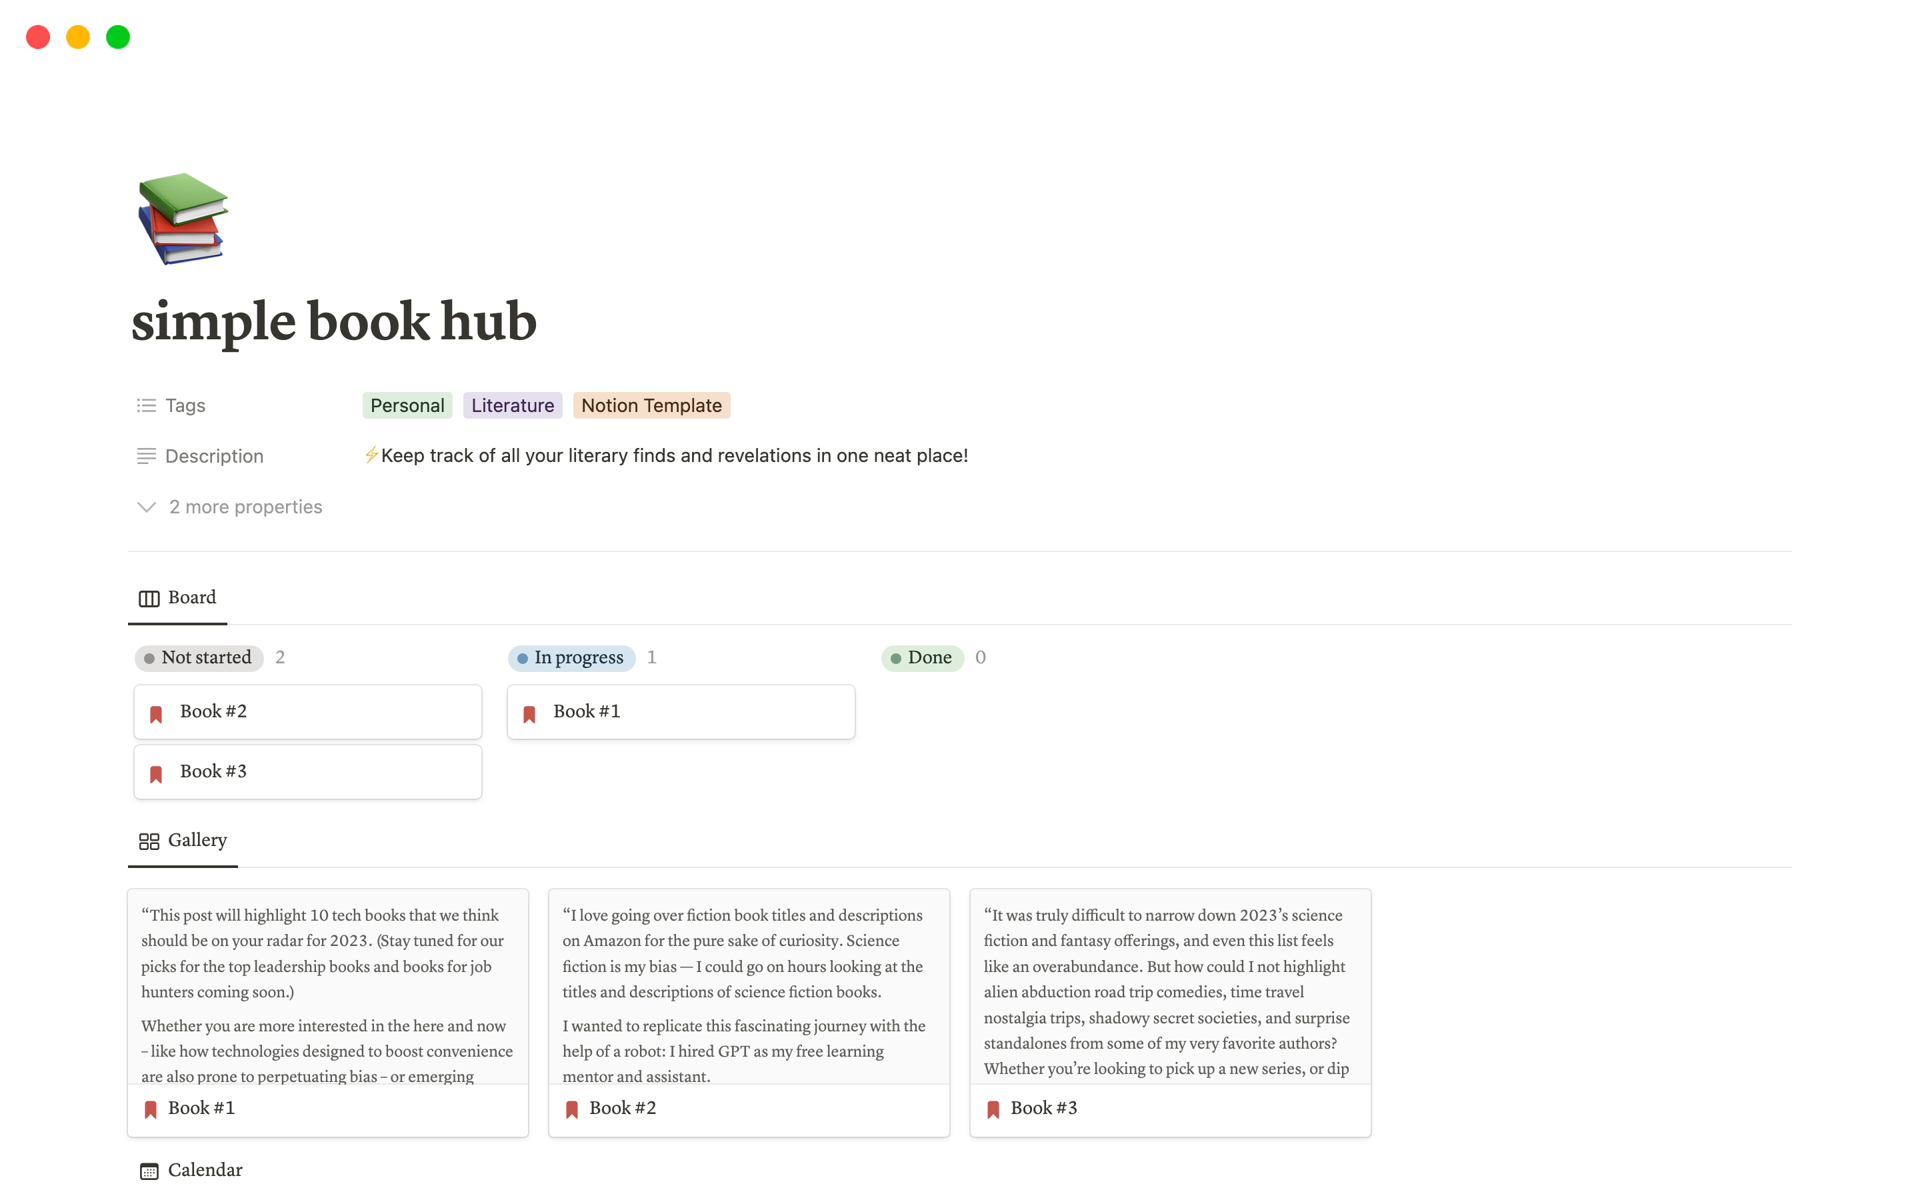 This template allows users to keep track of books they read in a pain-free and intuitive way.